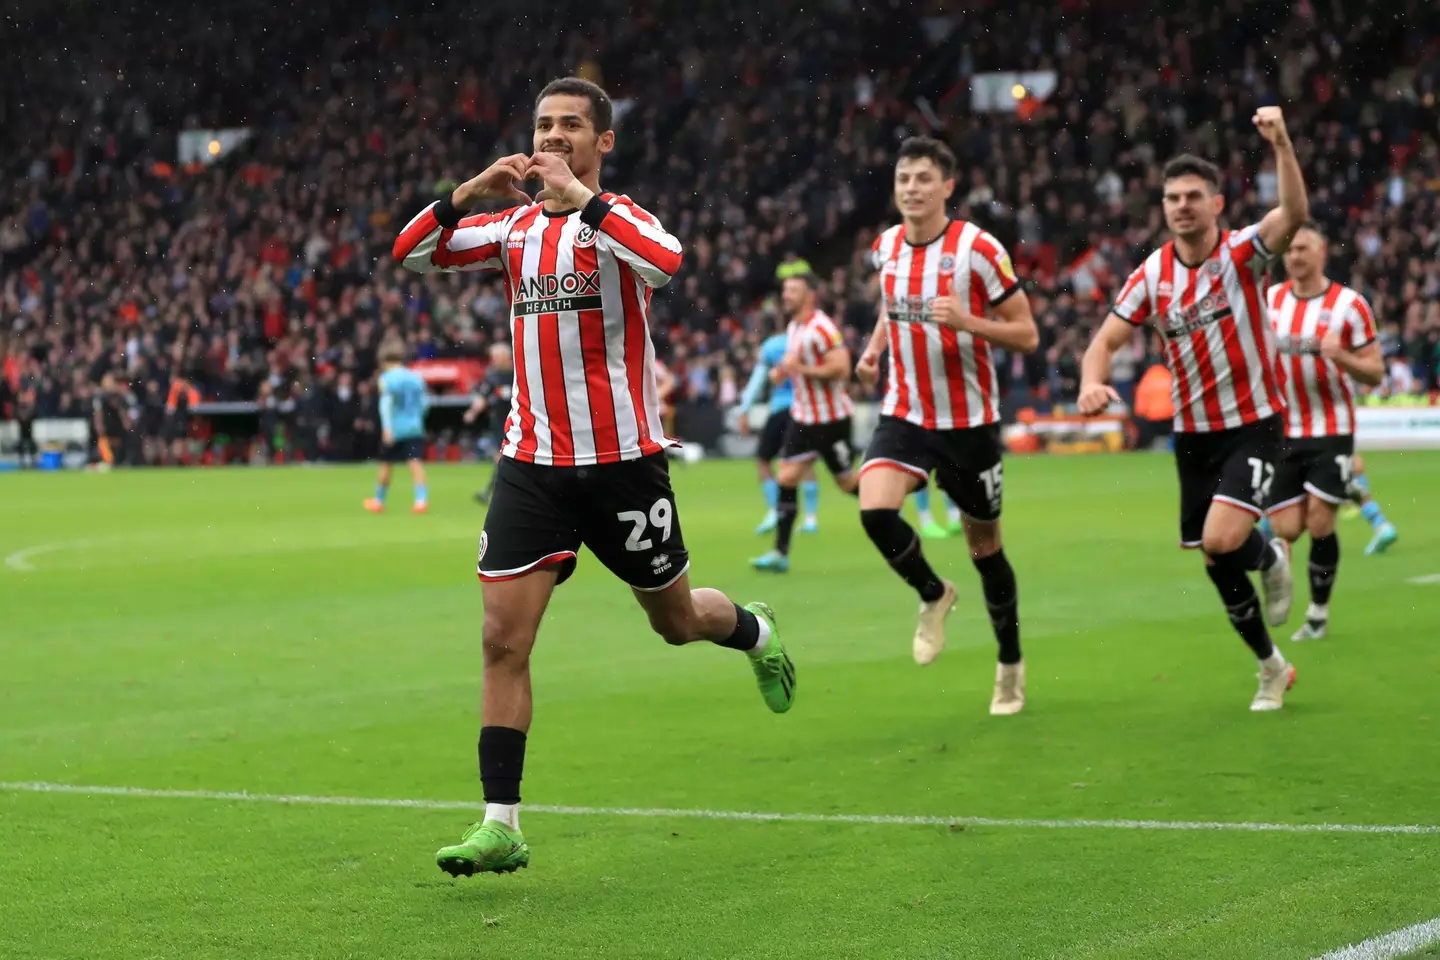 Iliman Ndiaye has been in superb form for Sheffield United this season. Image credit: Alamy